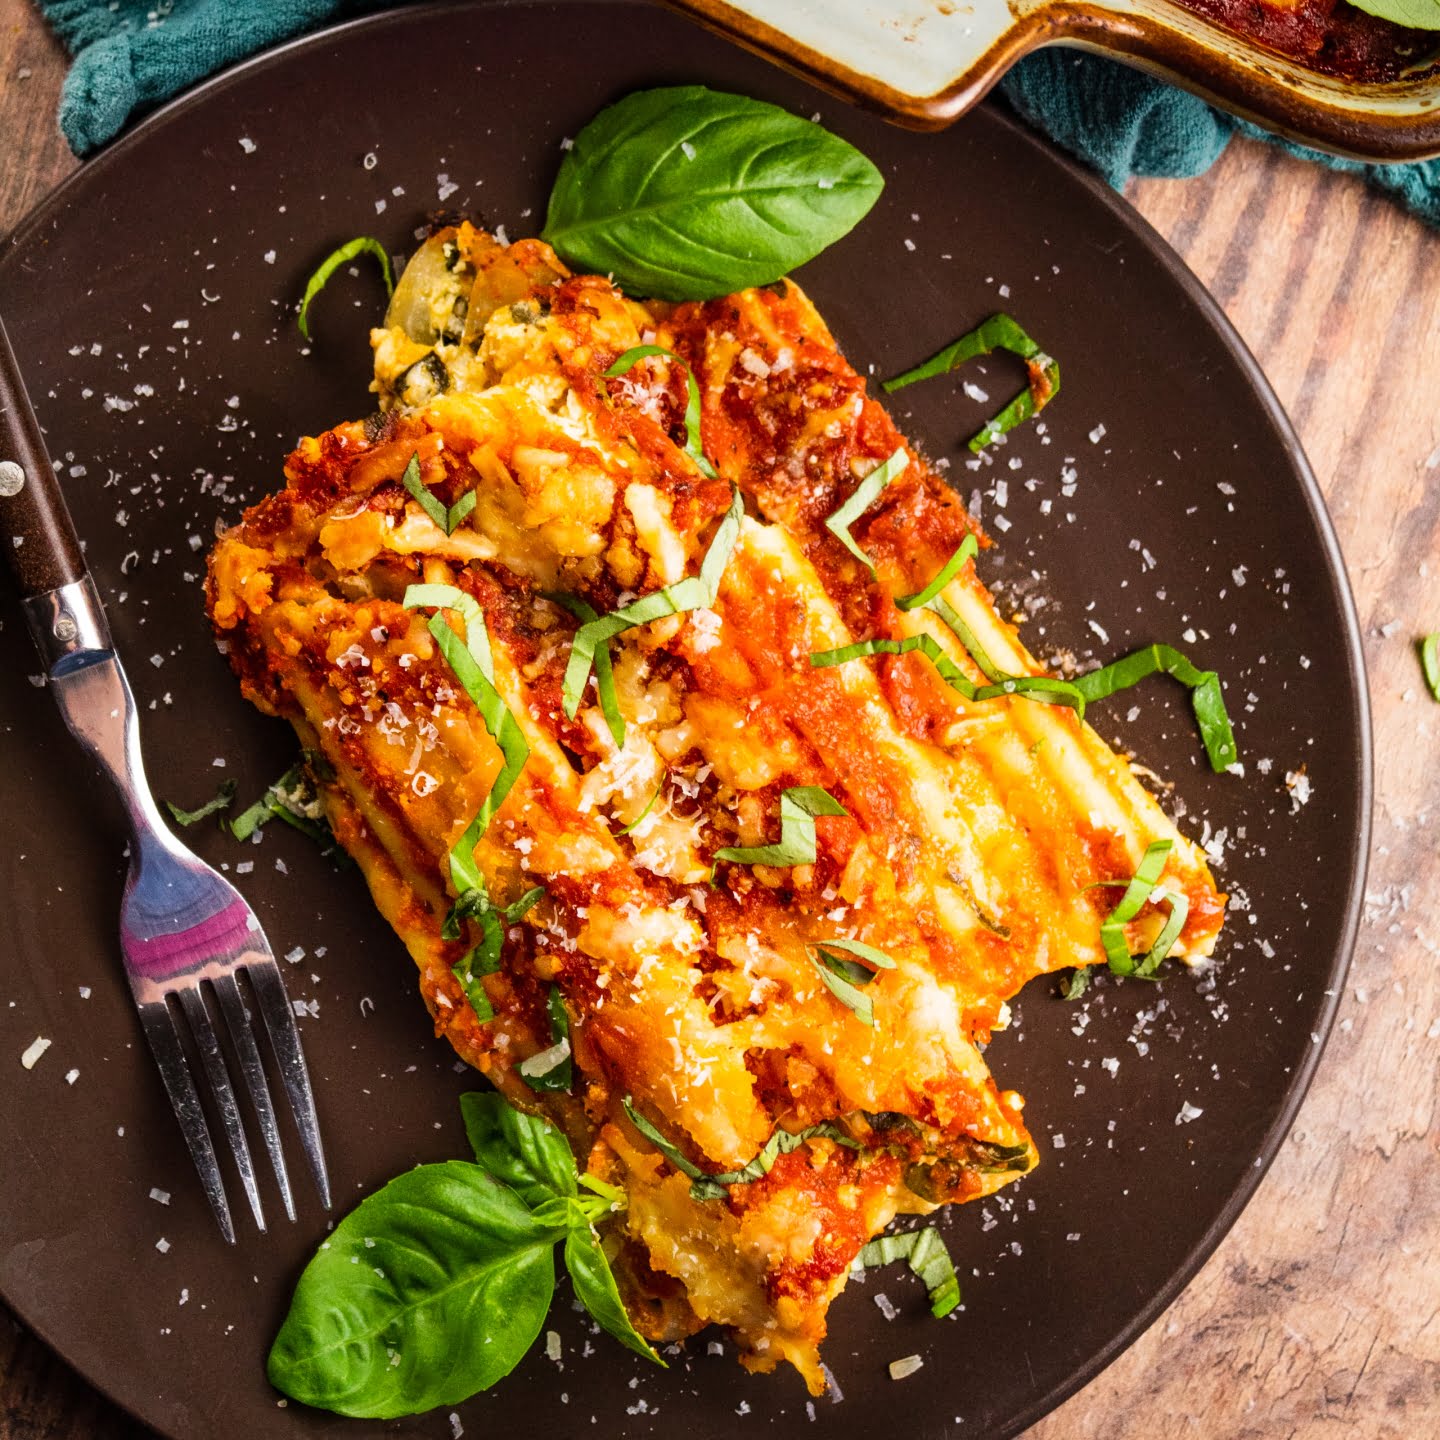 Four Cheese Manicotti - Featured